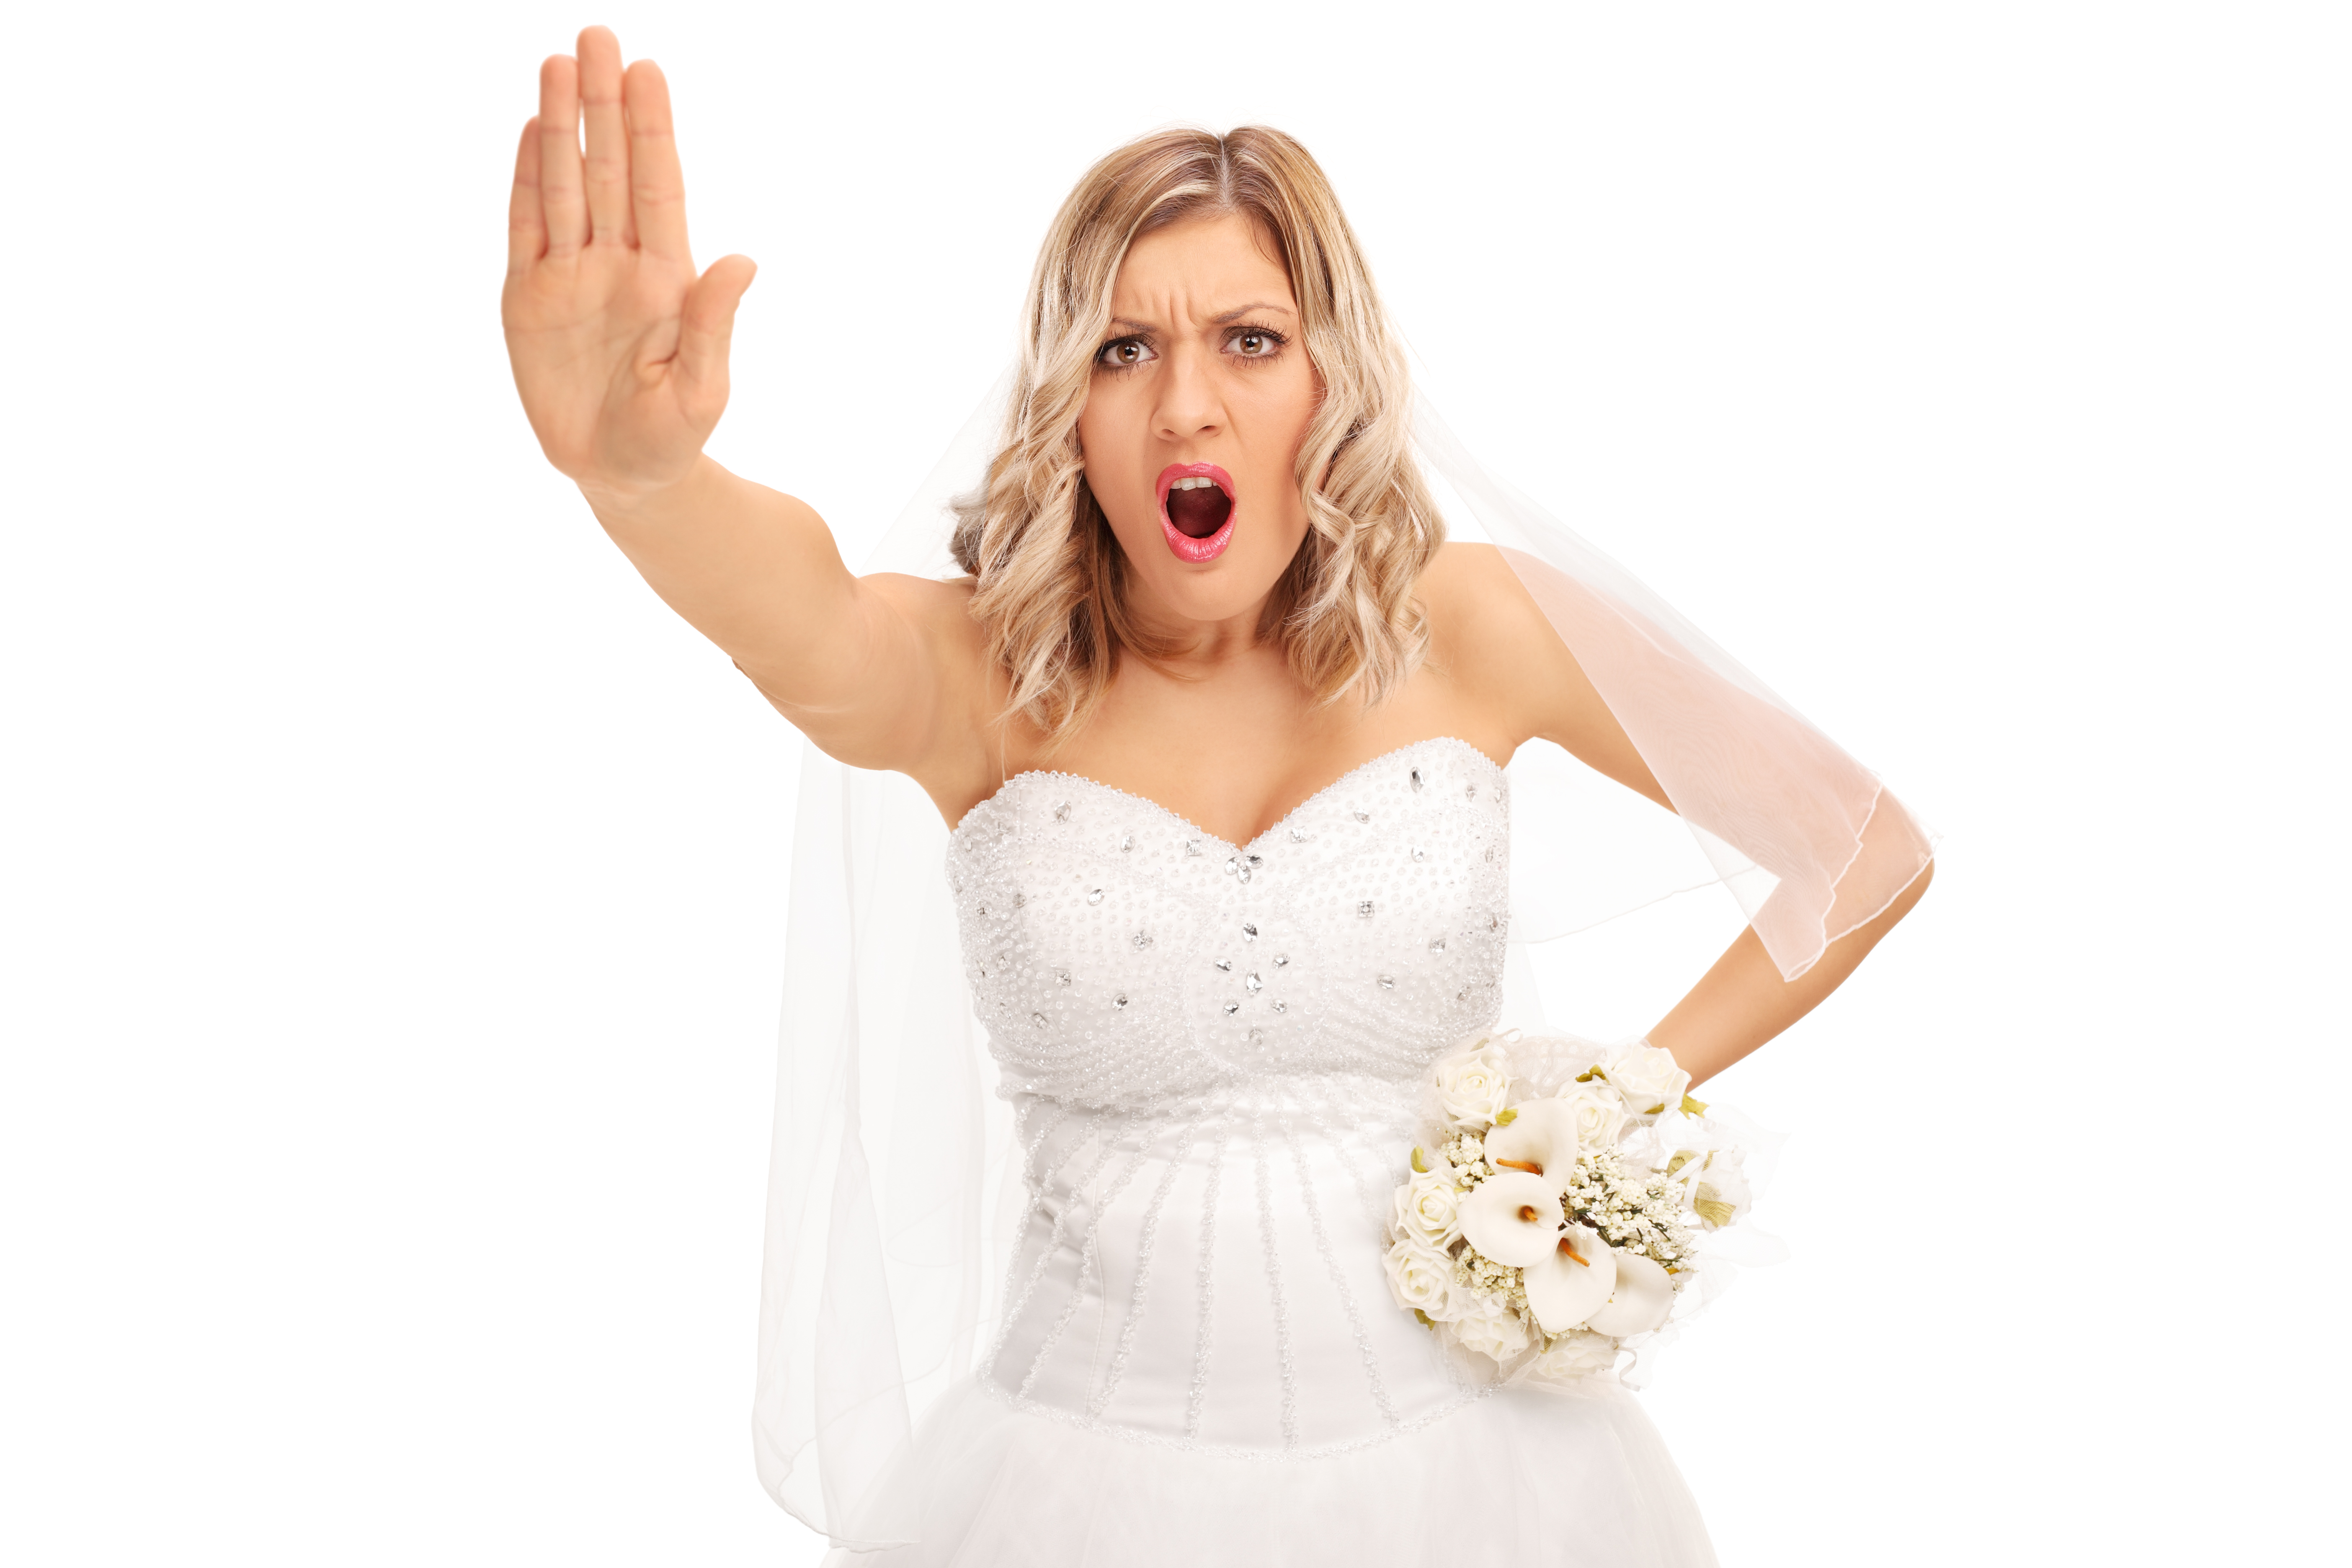 Angry bride with her hand up indicating "stop" | Source: Shutterstock